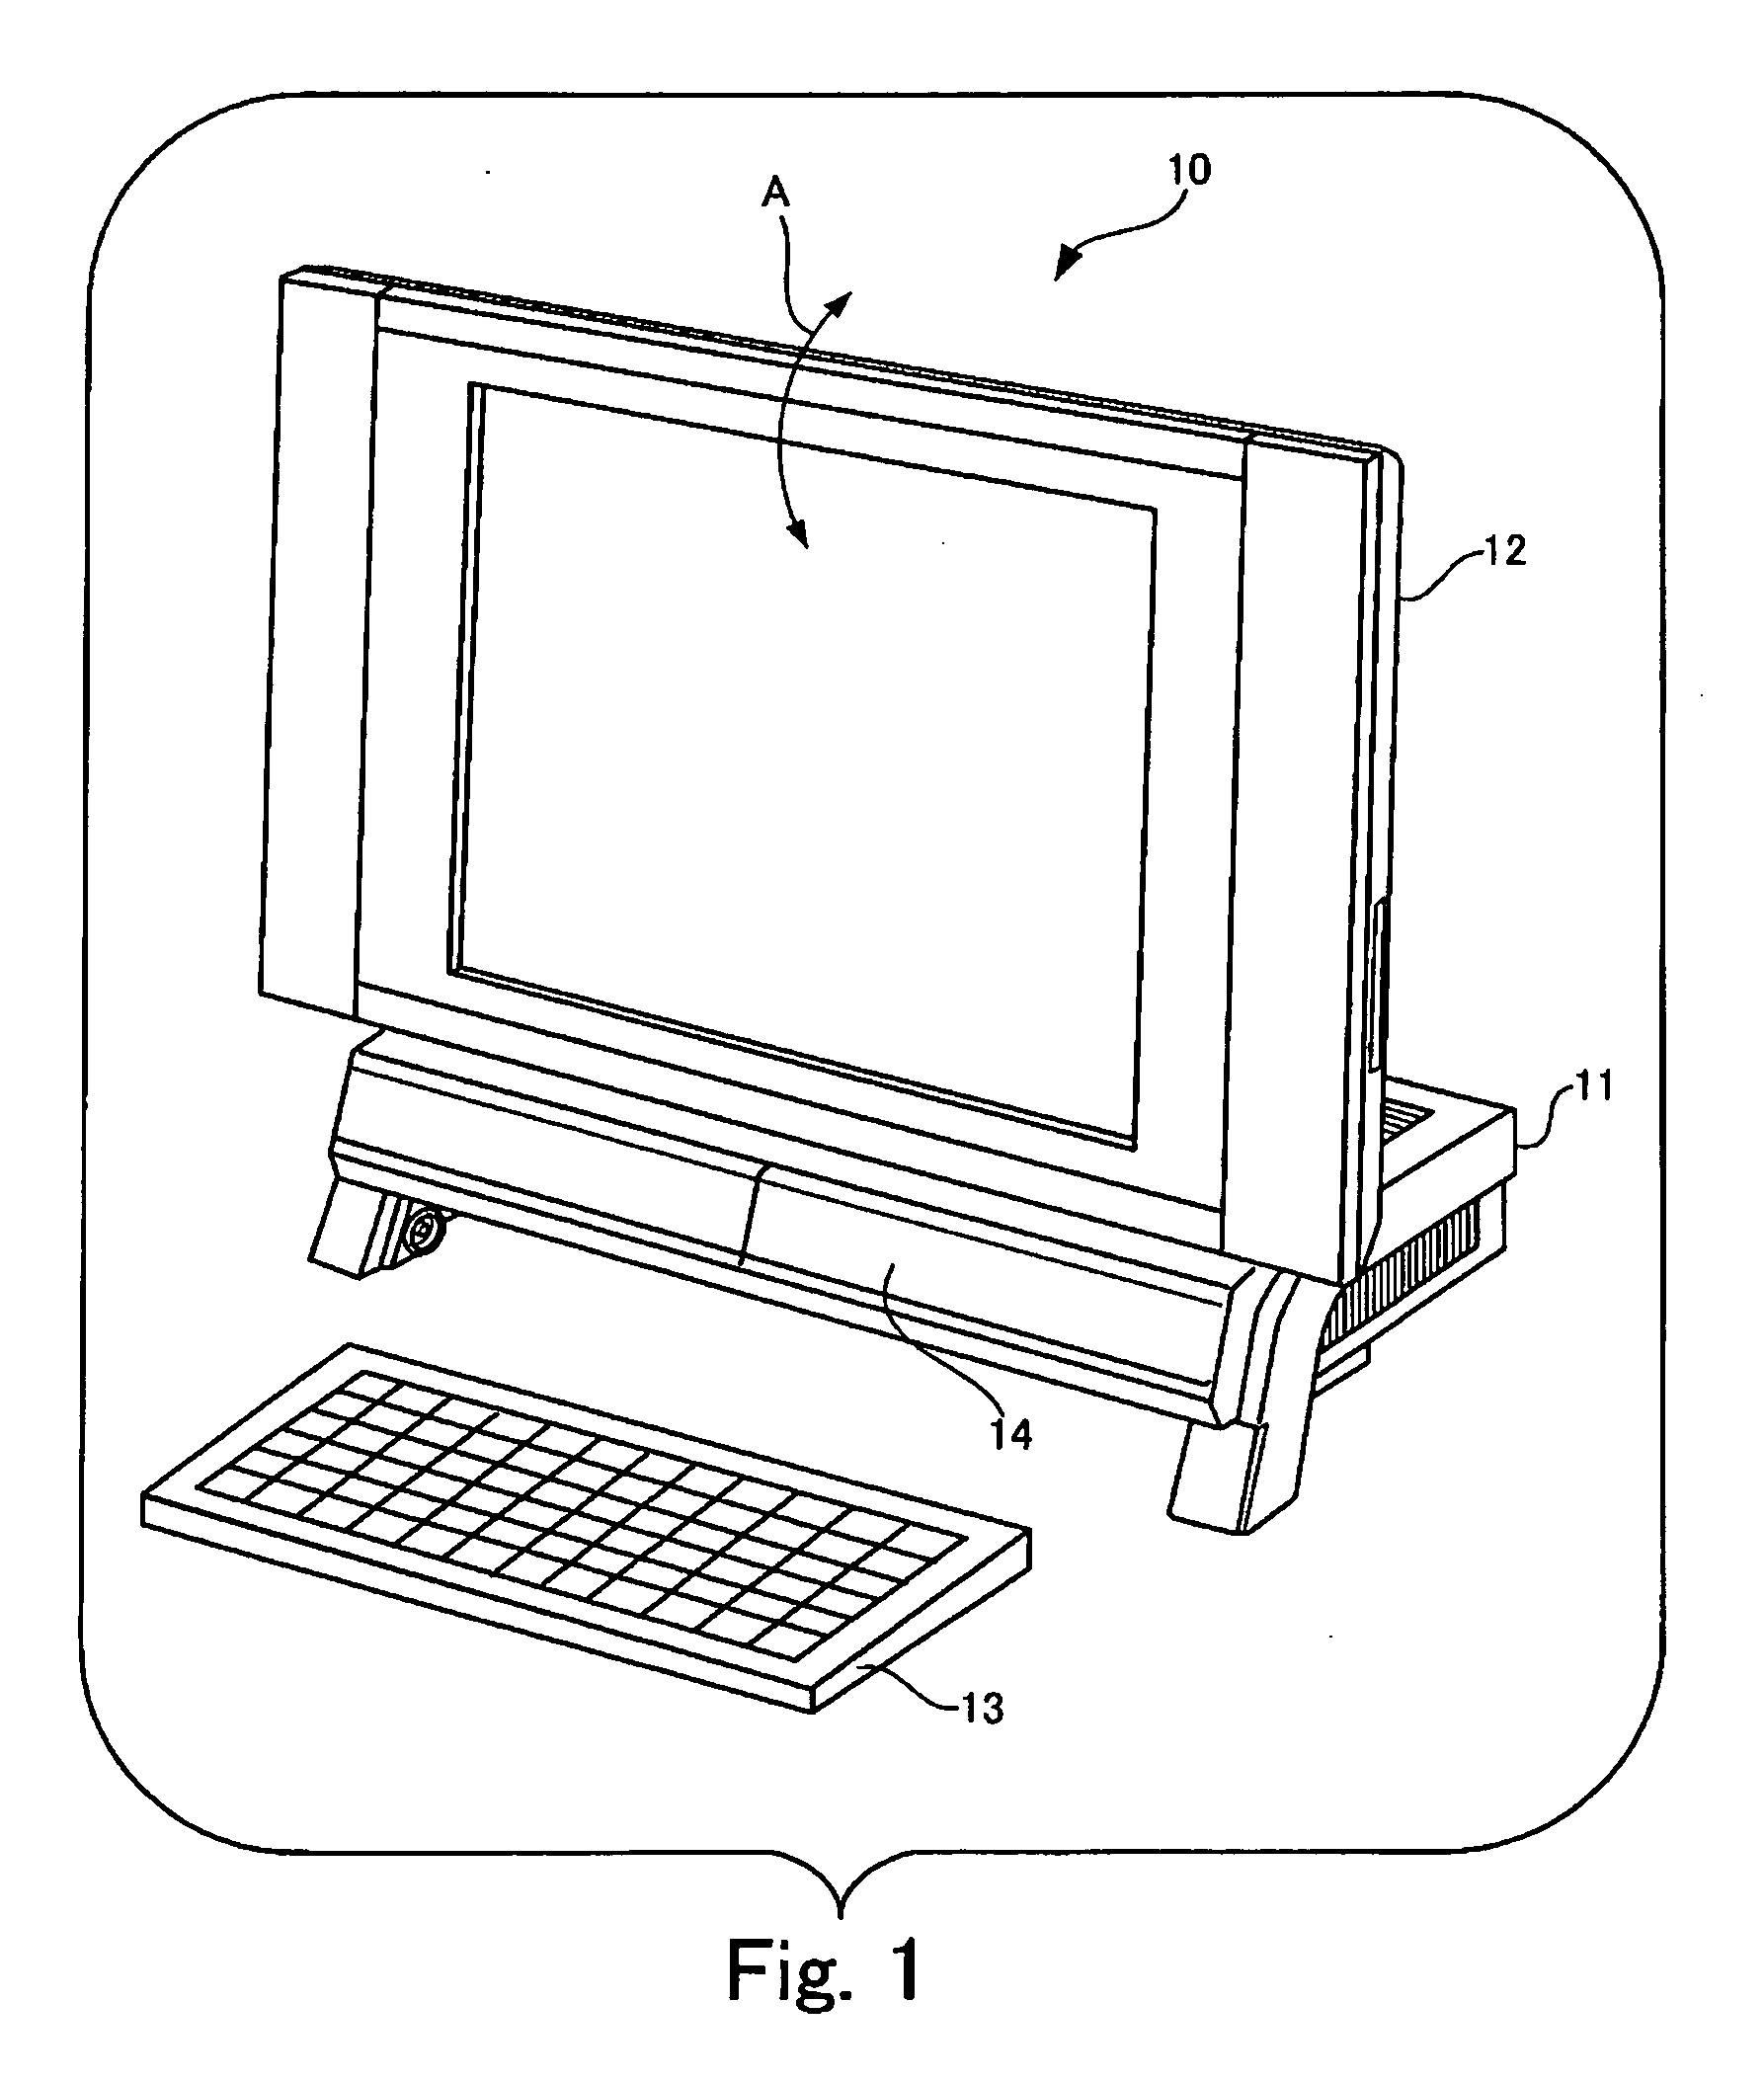 Casing structure and electronic device